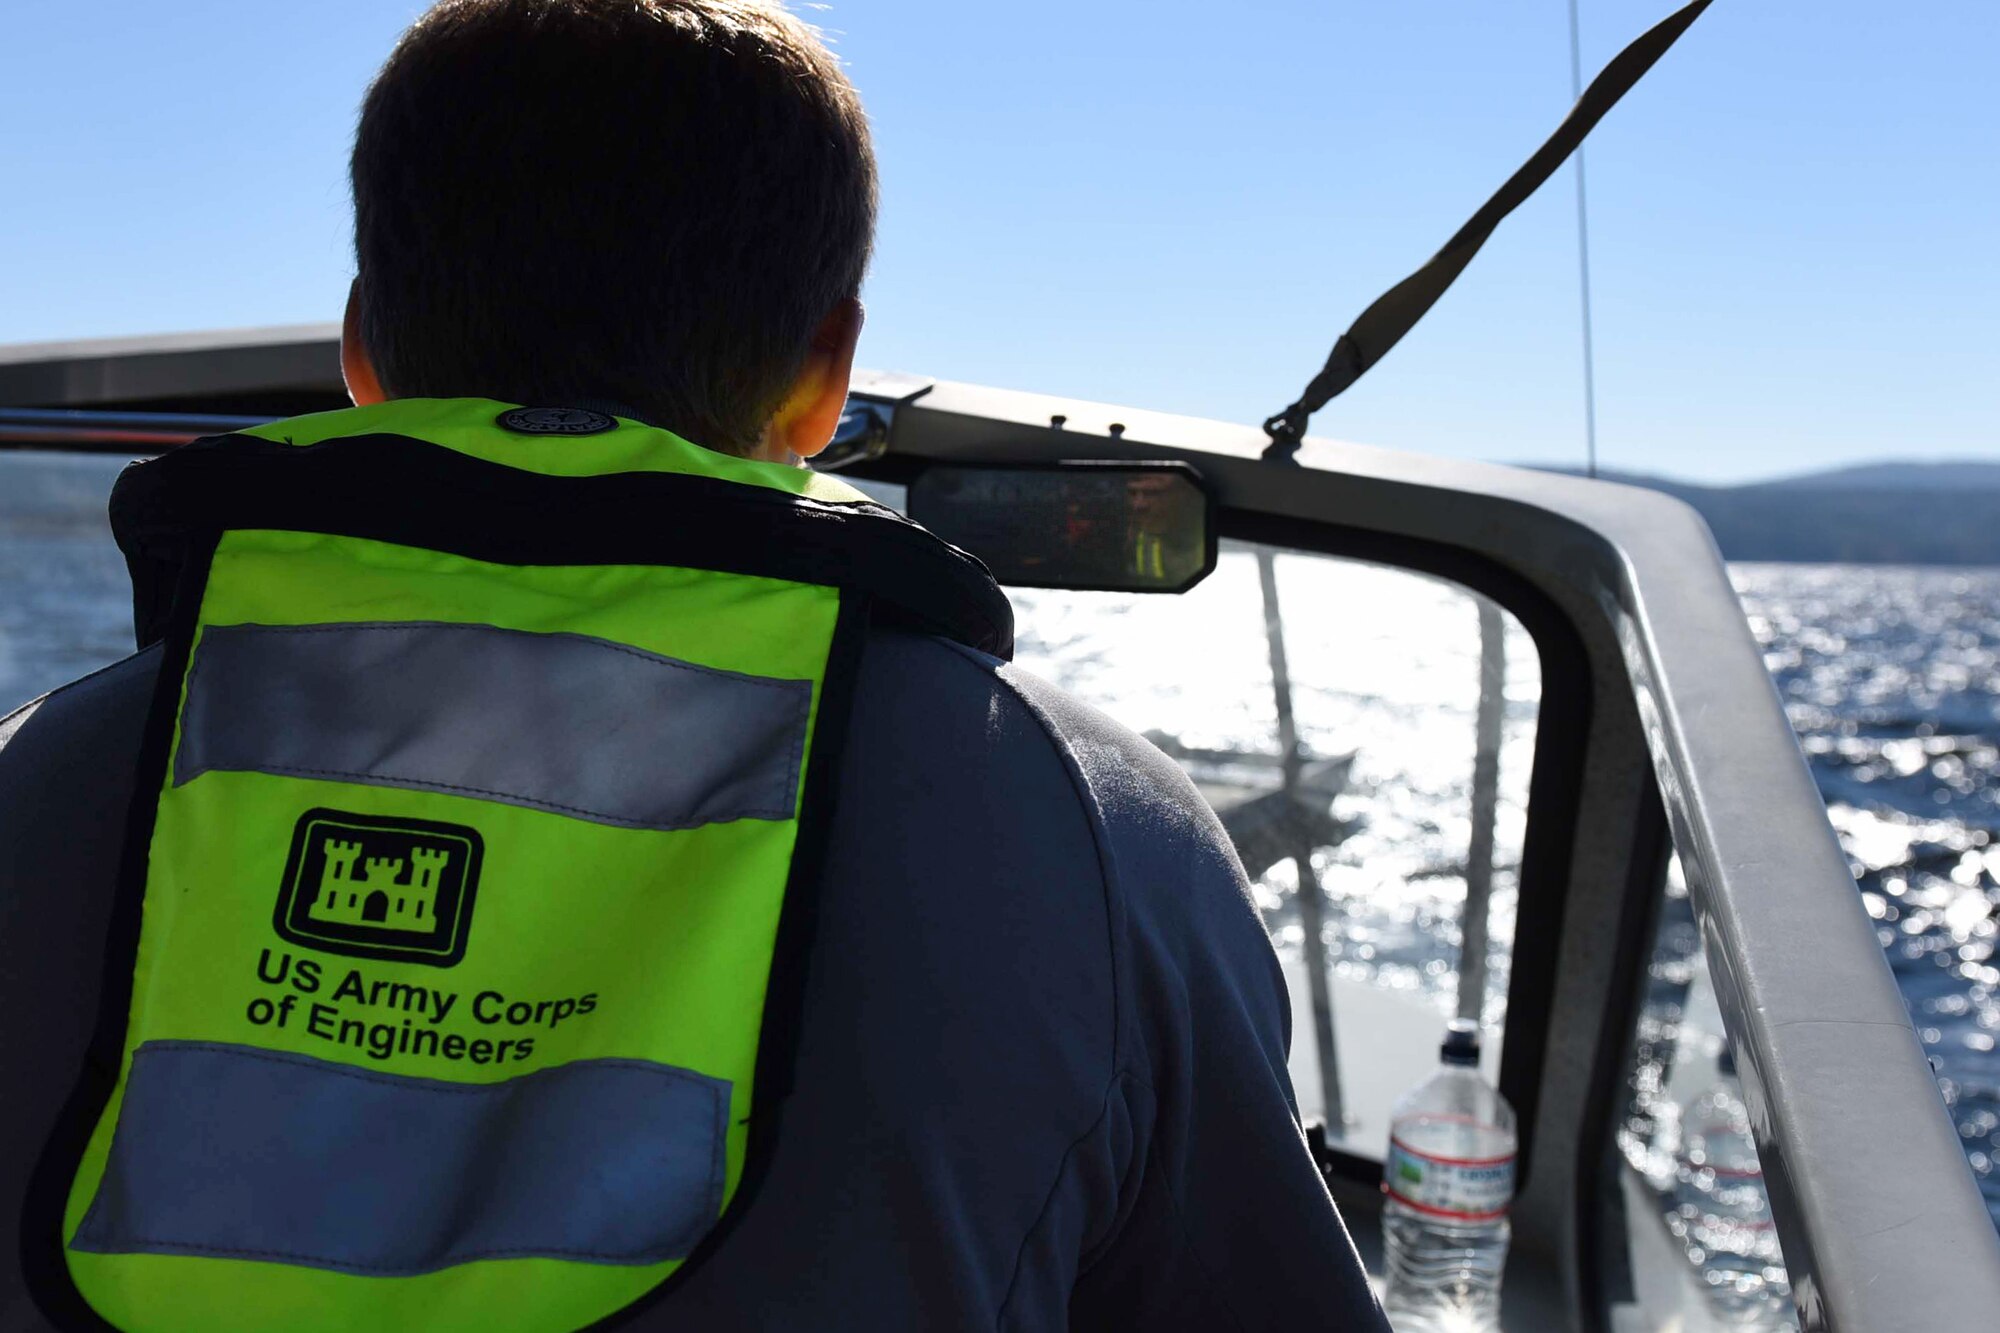 A member of the U.S. Army Corps of Engineers operates a boat during the first-ever search and rescue exercise of the Turkey Shoot competition Nov. 17, 2016, at Lake Ouachita, Ark. Little Rock Air Force Base continuously partners with Arkansas agencies to execute training exercises throughout the state. (U.S. Air Force photo by Airman 1st Class Kevin Sommer Giron)